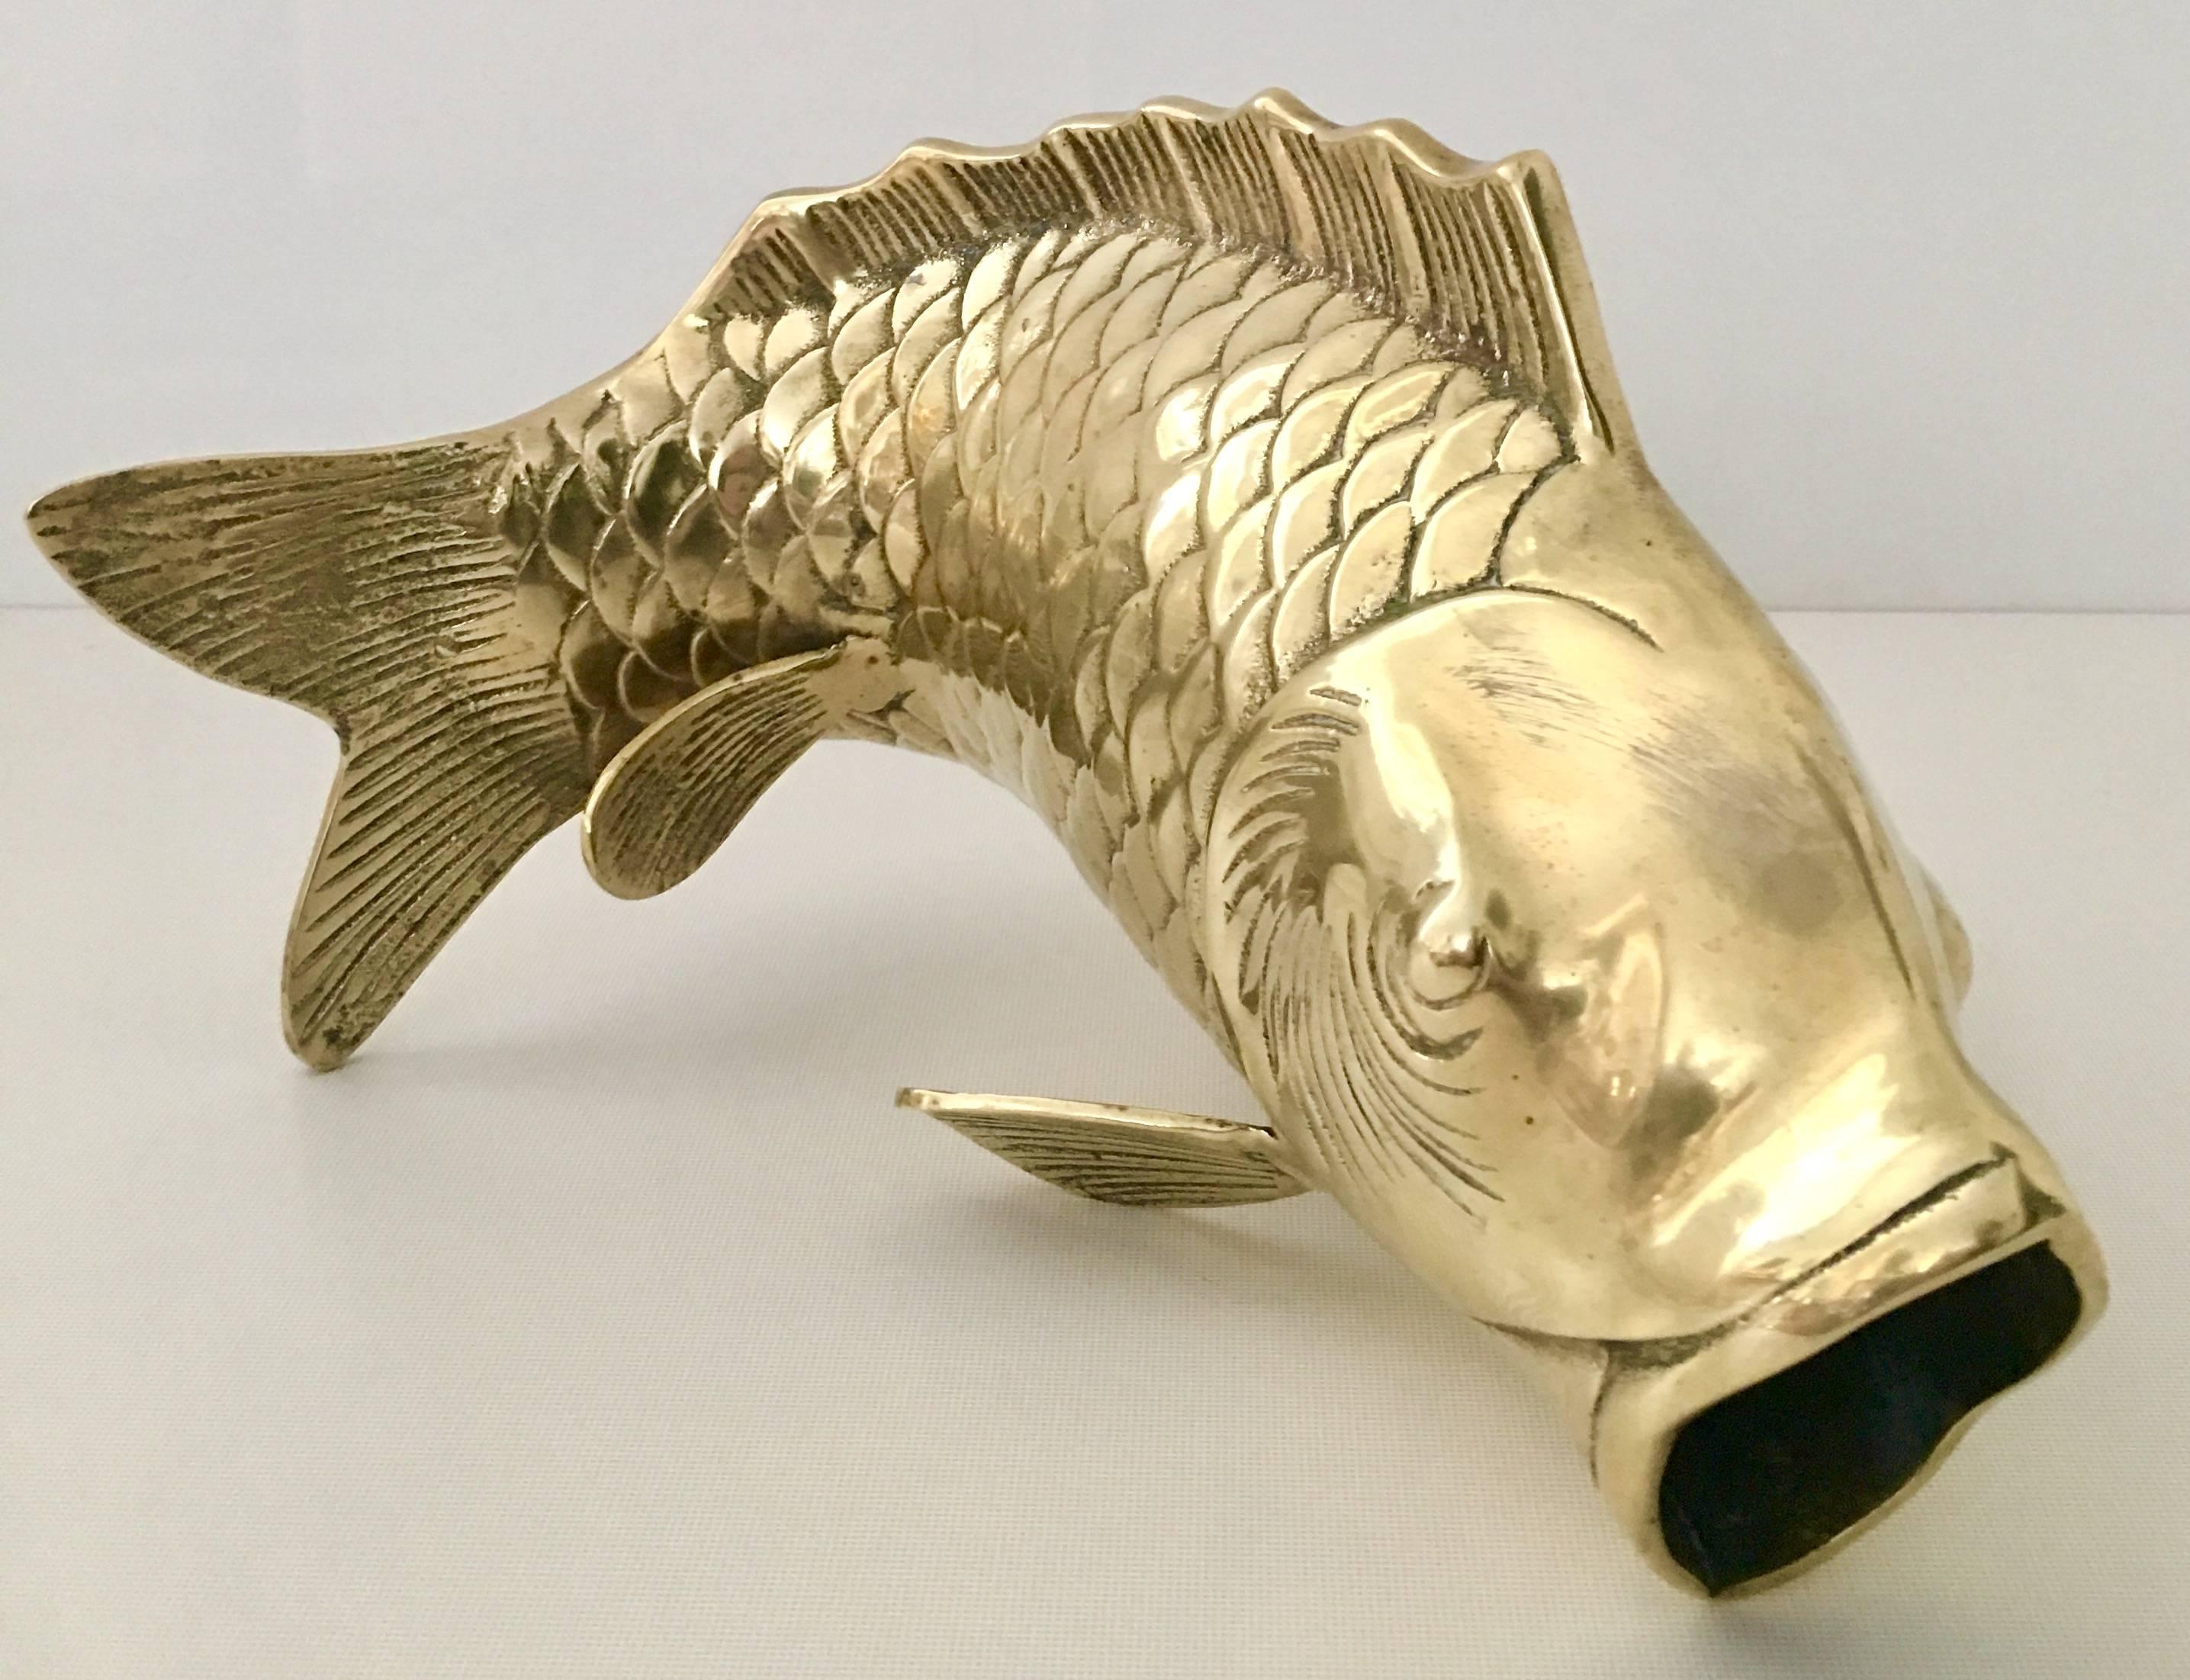 Incredible lifesize Koi fish vase sculpture made of solid brass. Features life like scale and fins and open mouth vase detail. Can be displayed in several positions.